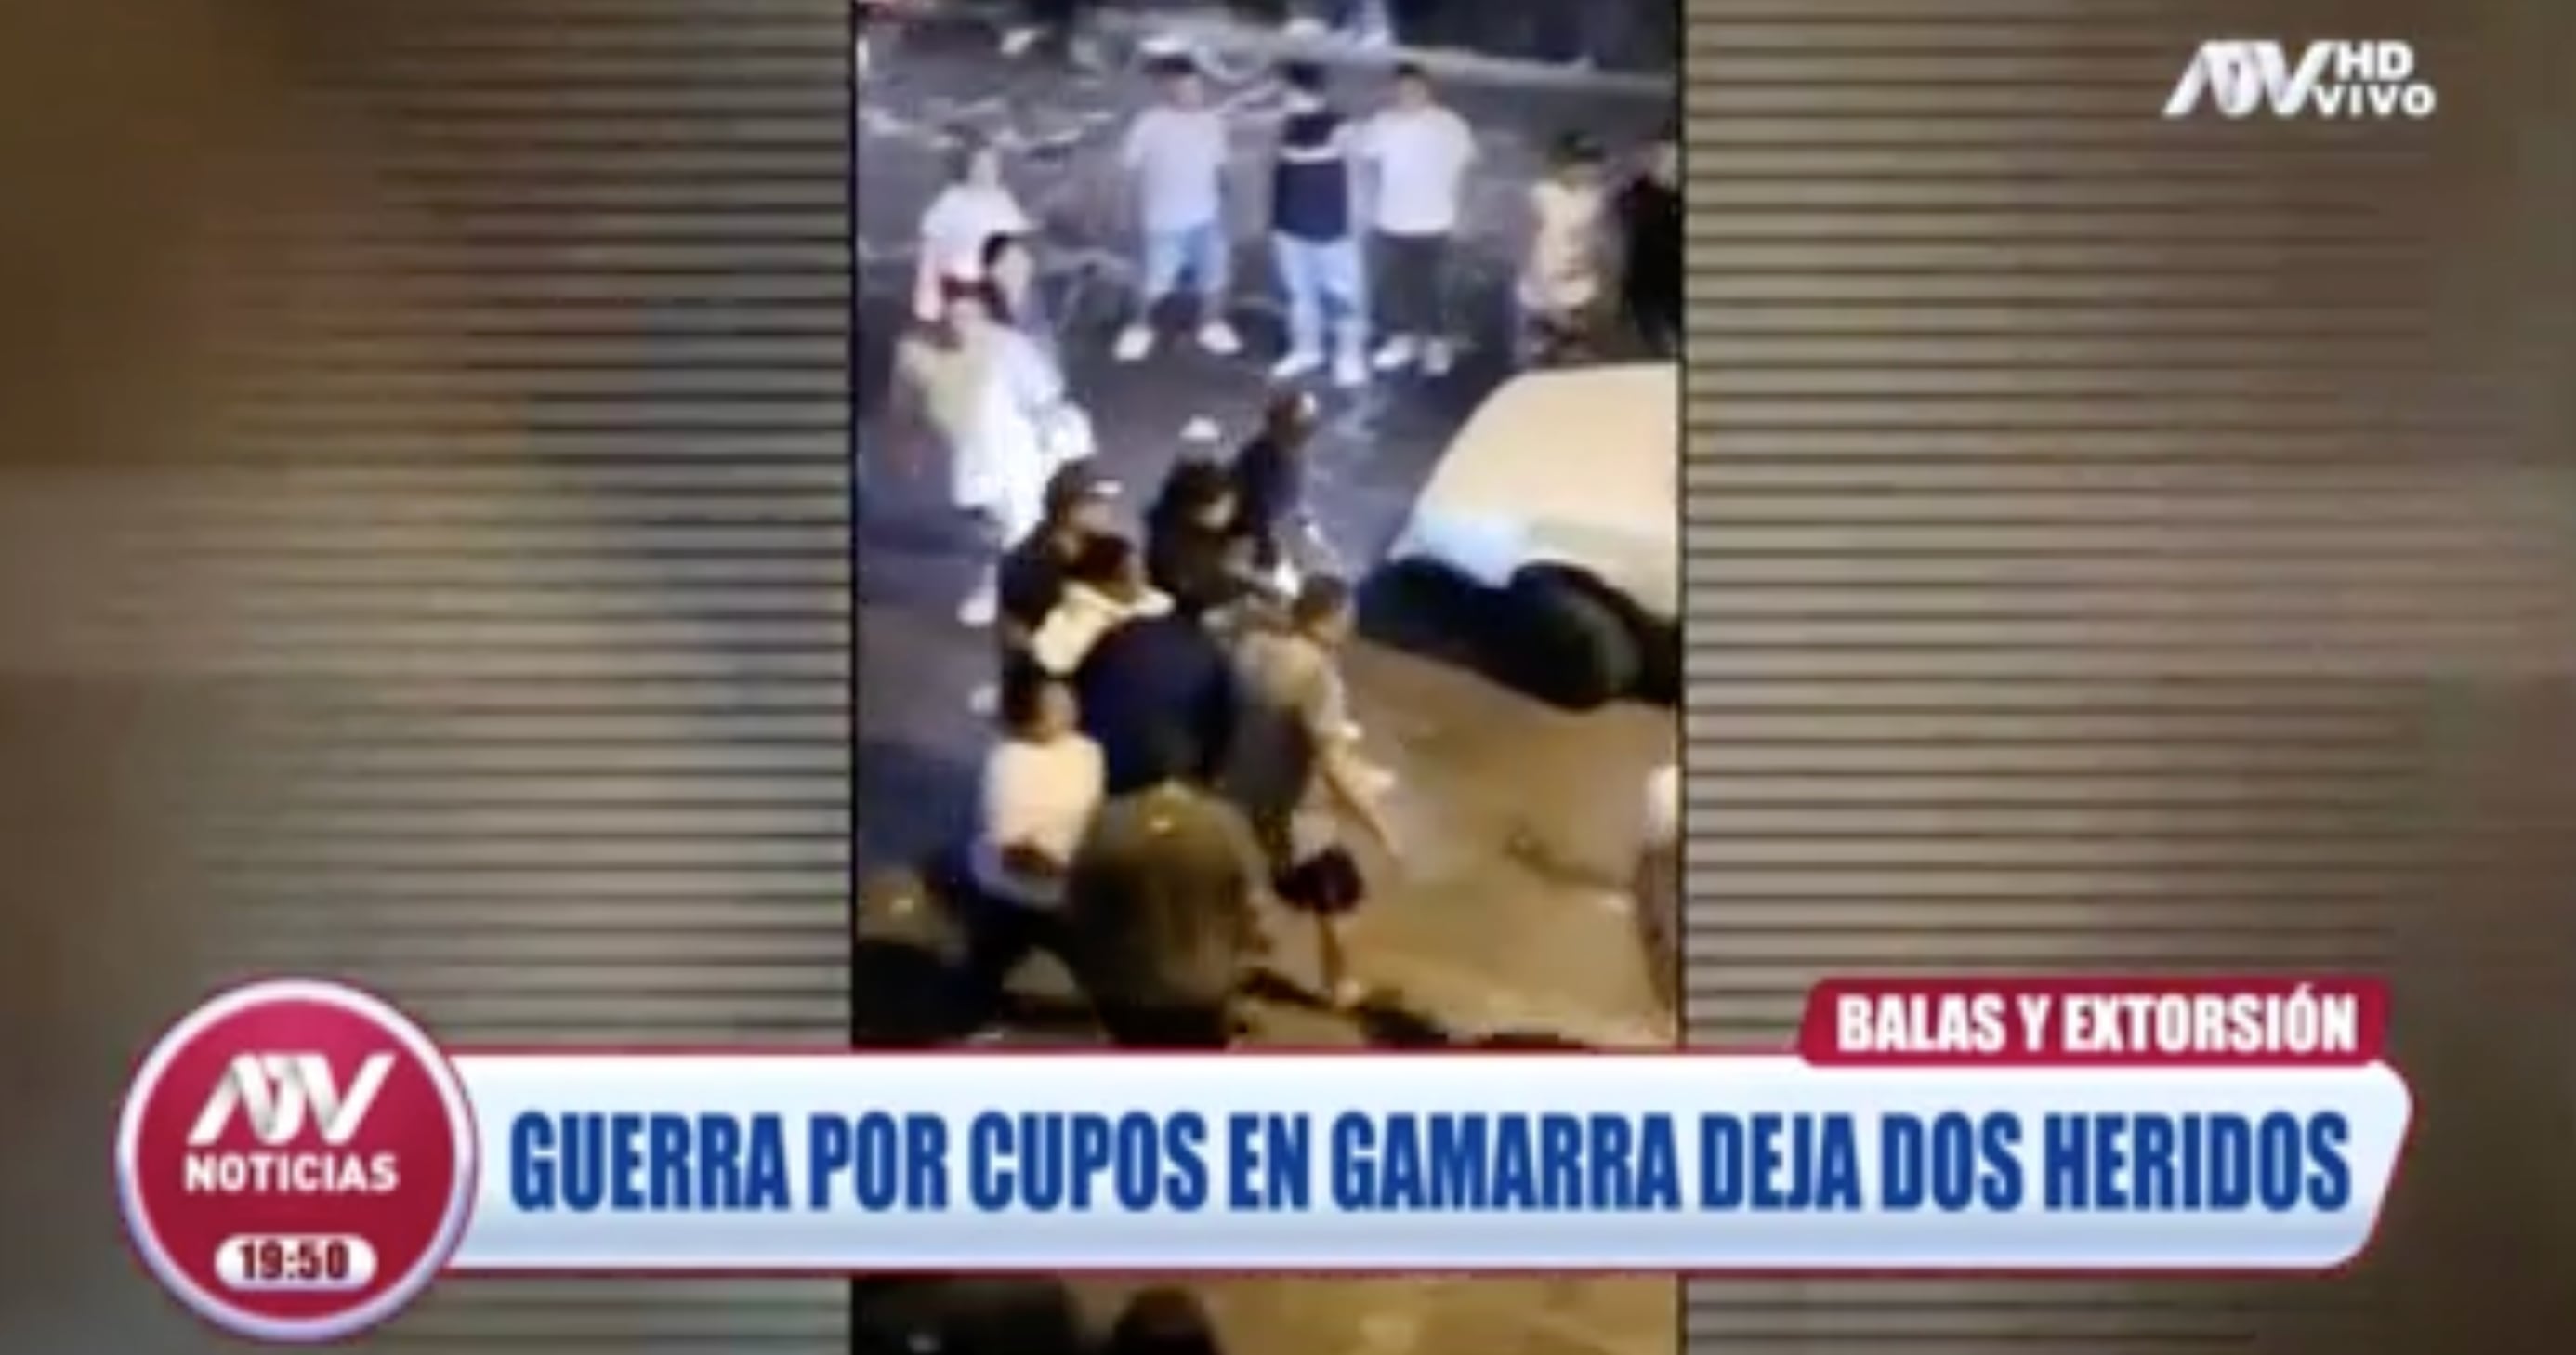 They shoot two individuals who are members of quota collection mafias in Gamarra.